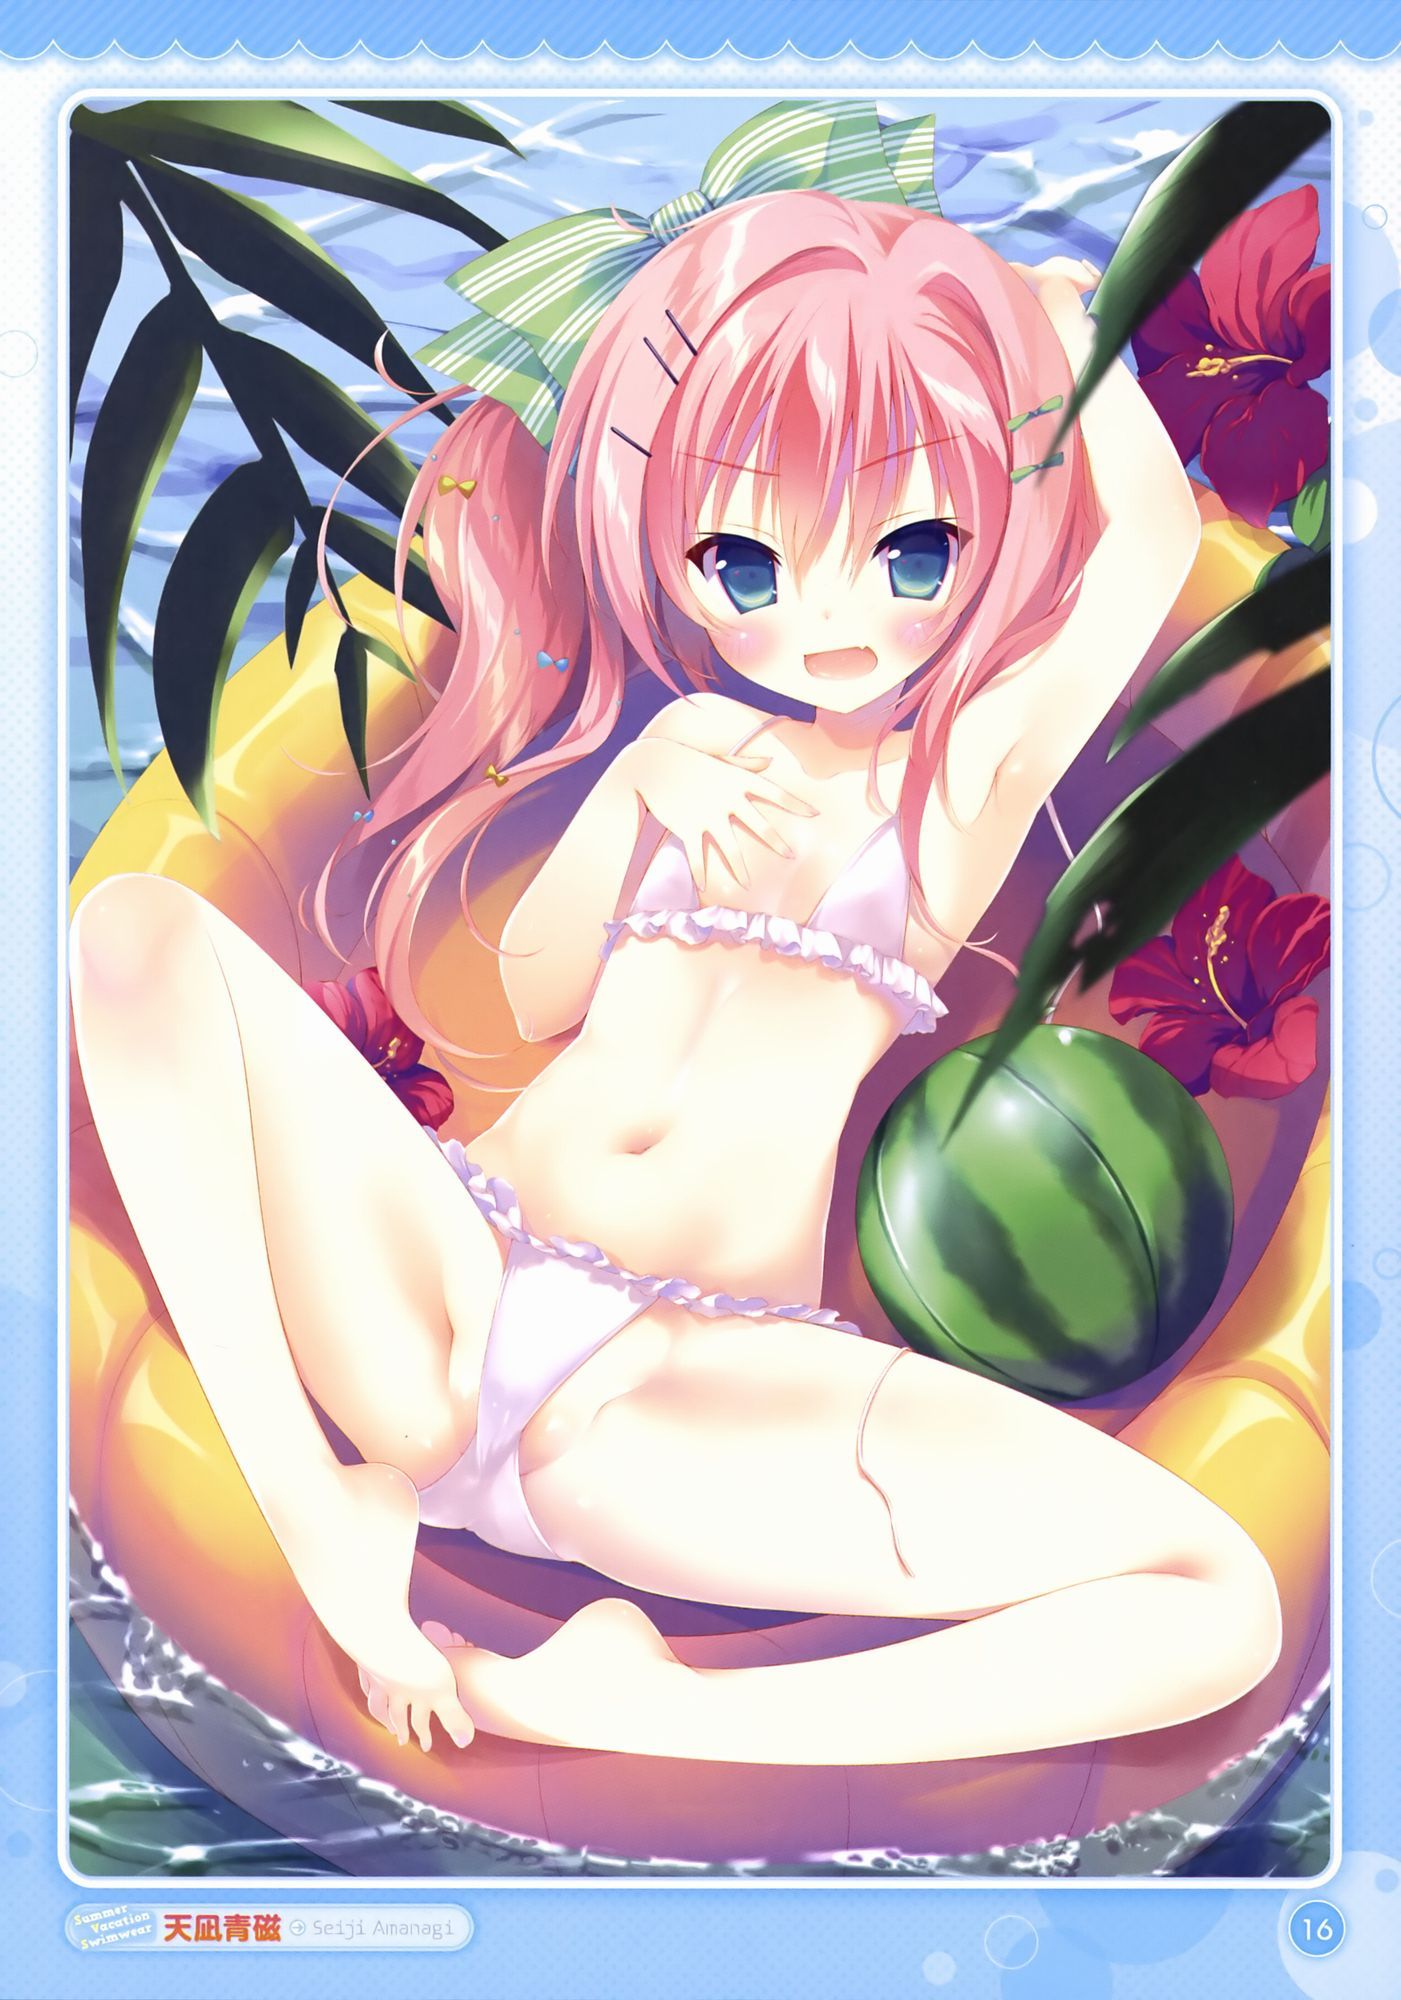 [Secondary-ZIP: pichpich showing skin swimsuit girl picture 11